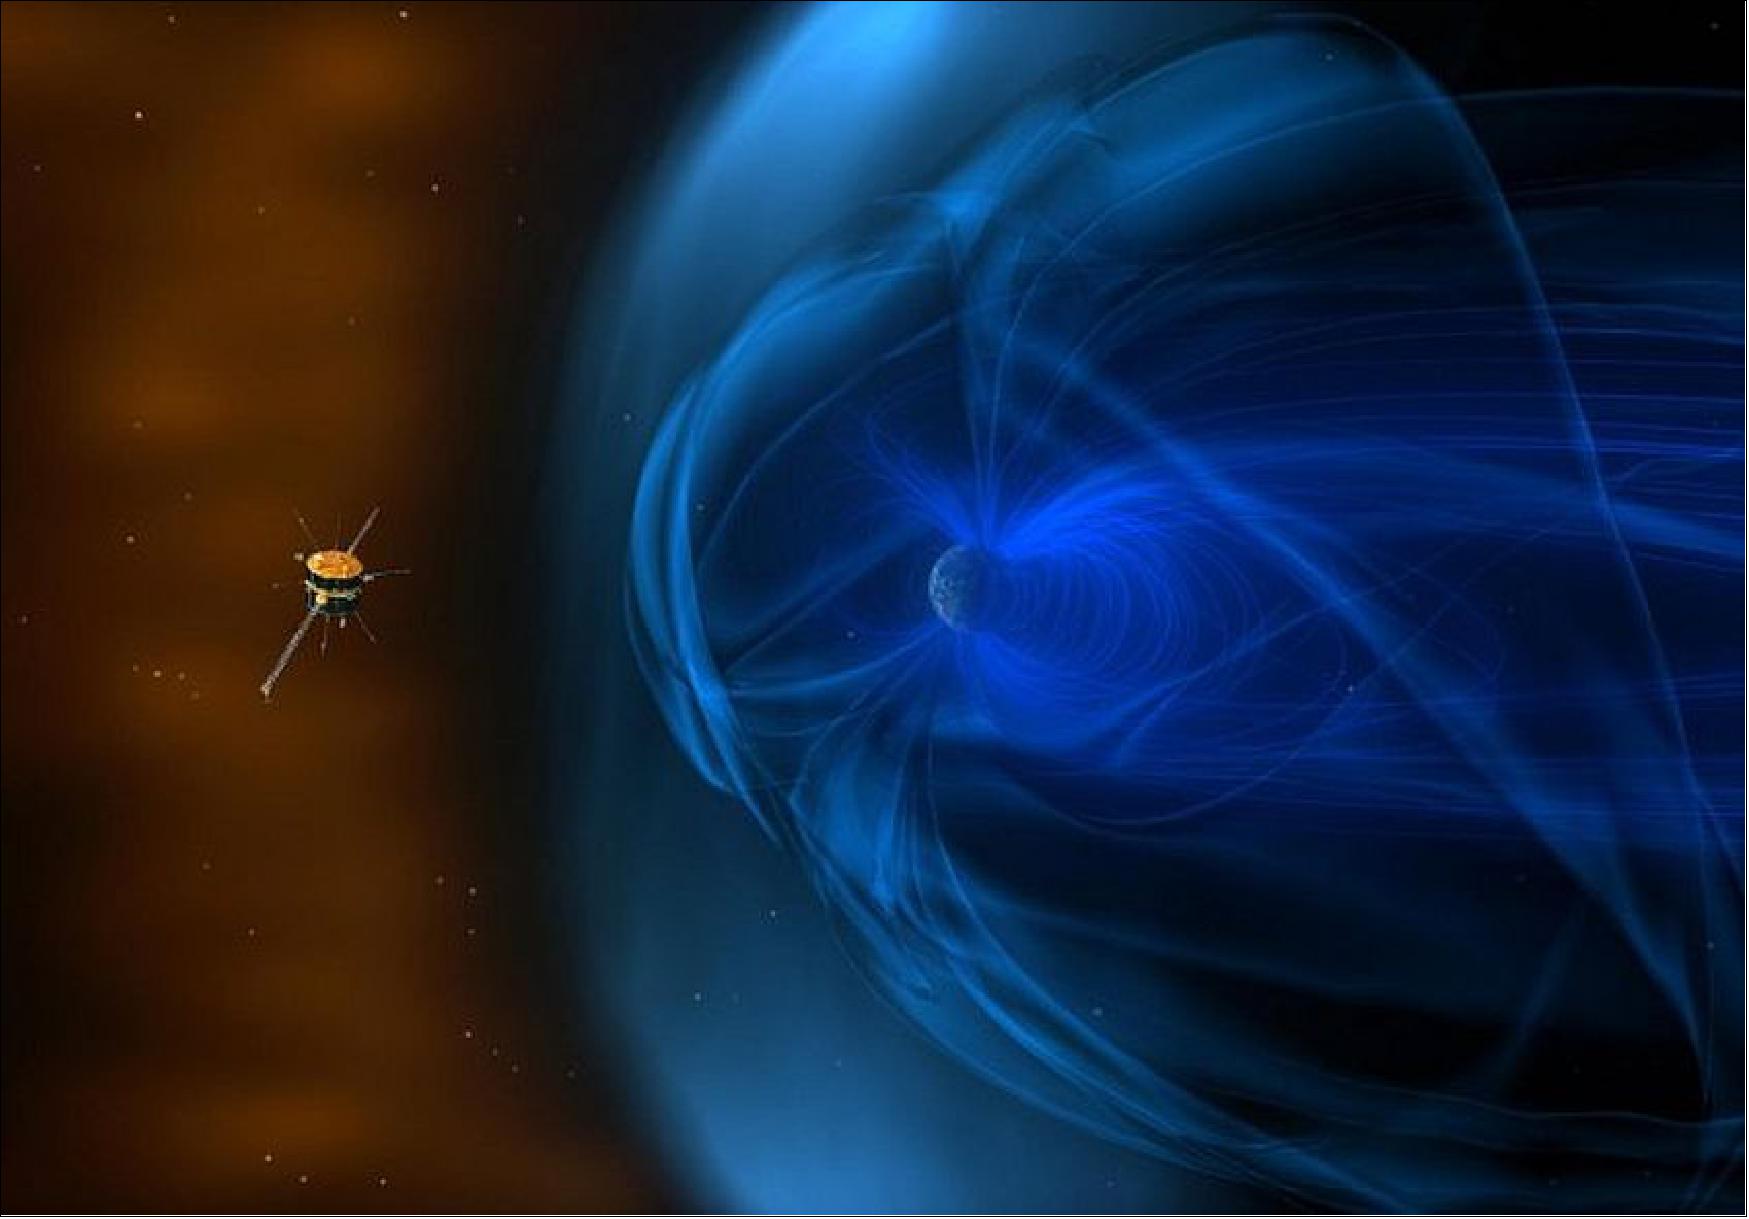 Figure 9: The Wind spacecraft from NASA's Heliophysics System Observatory has now spent two decades observing particles from the solar wind (image credit: NASA)